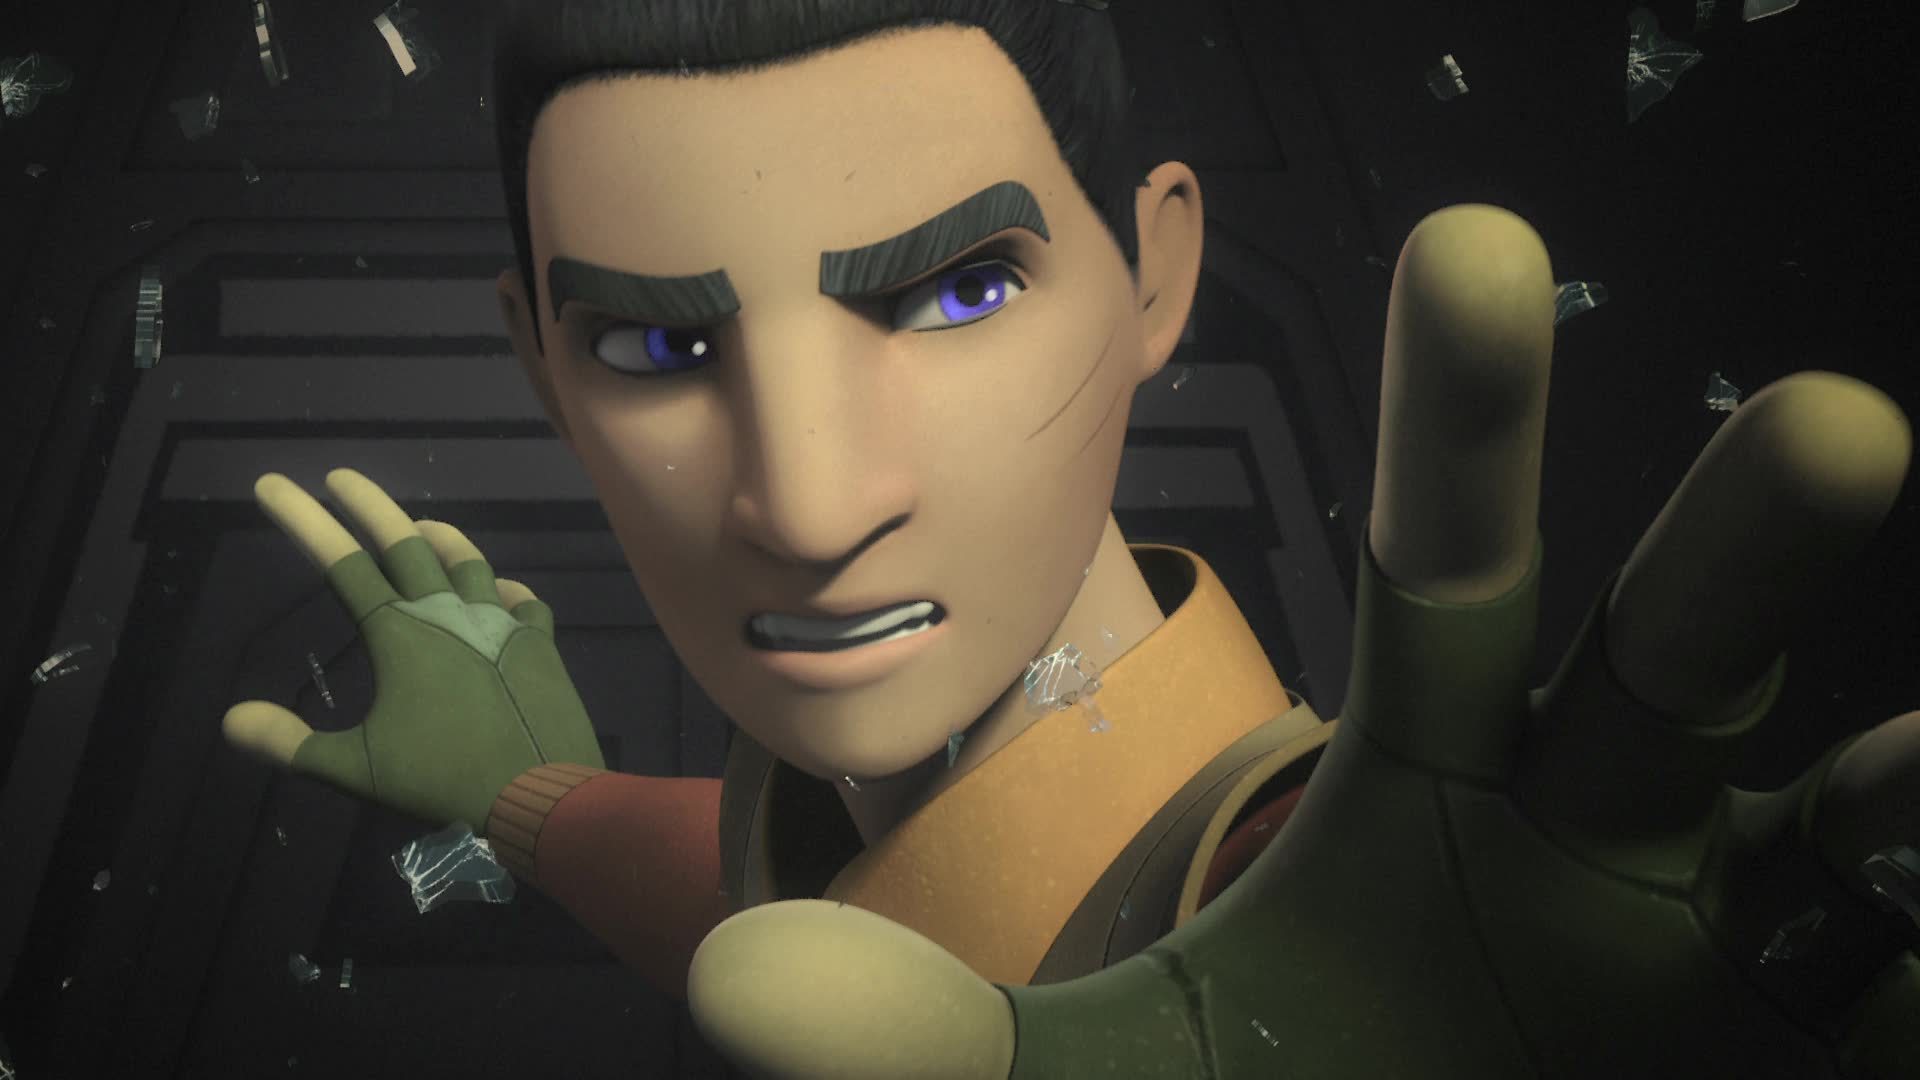 Star Wars Rebels Series Finale Sizzle | "Let's Finish This"